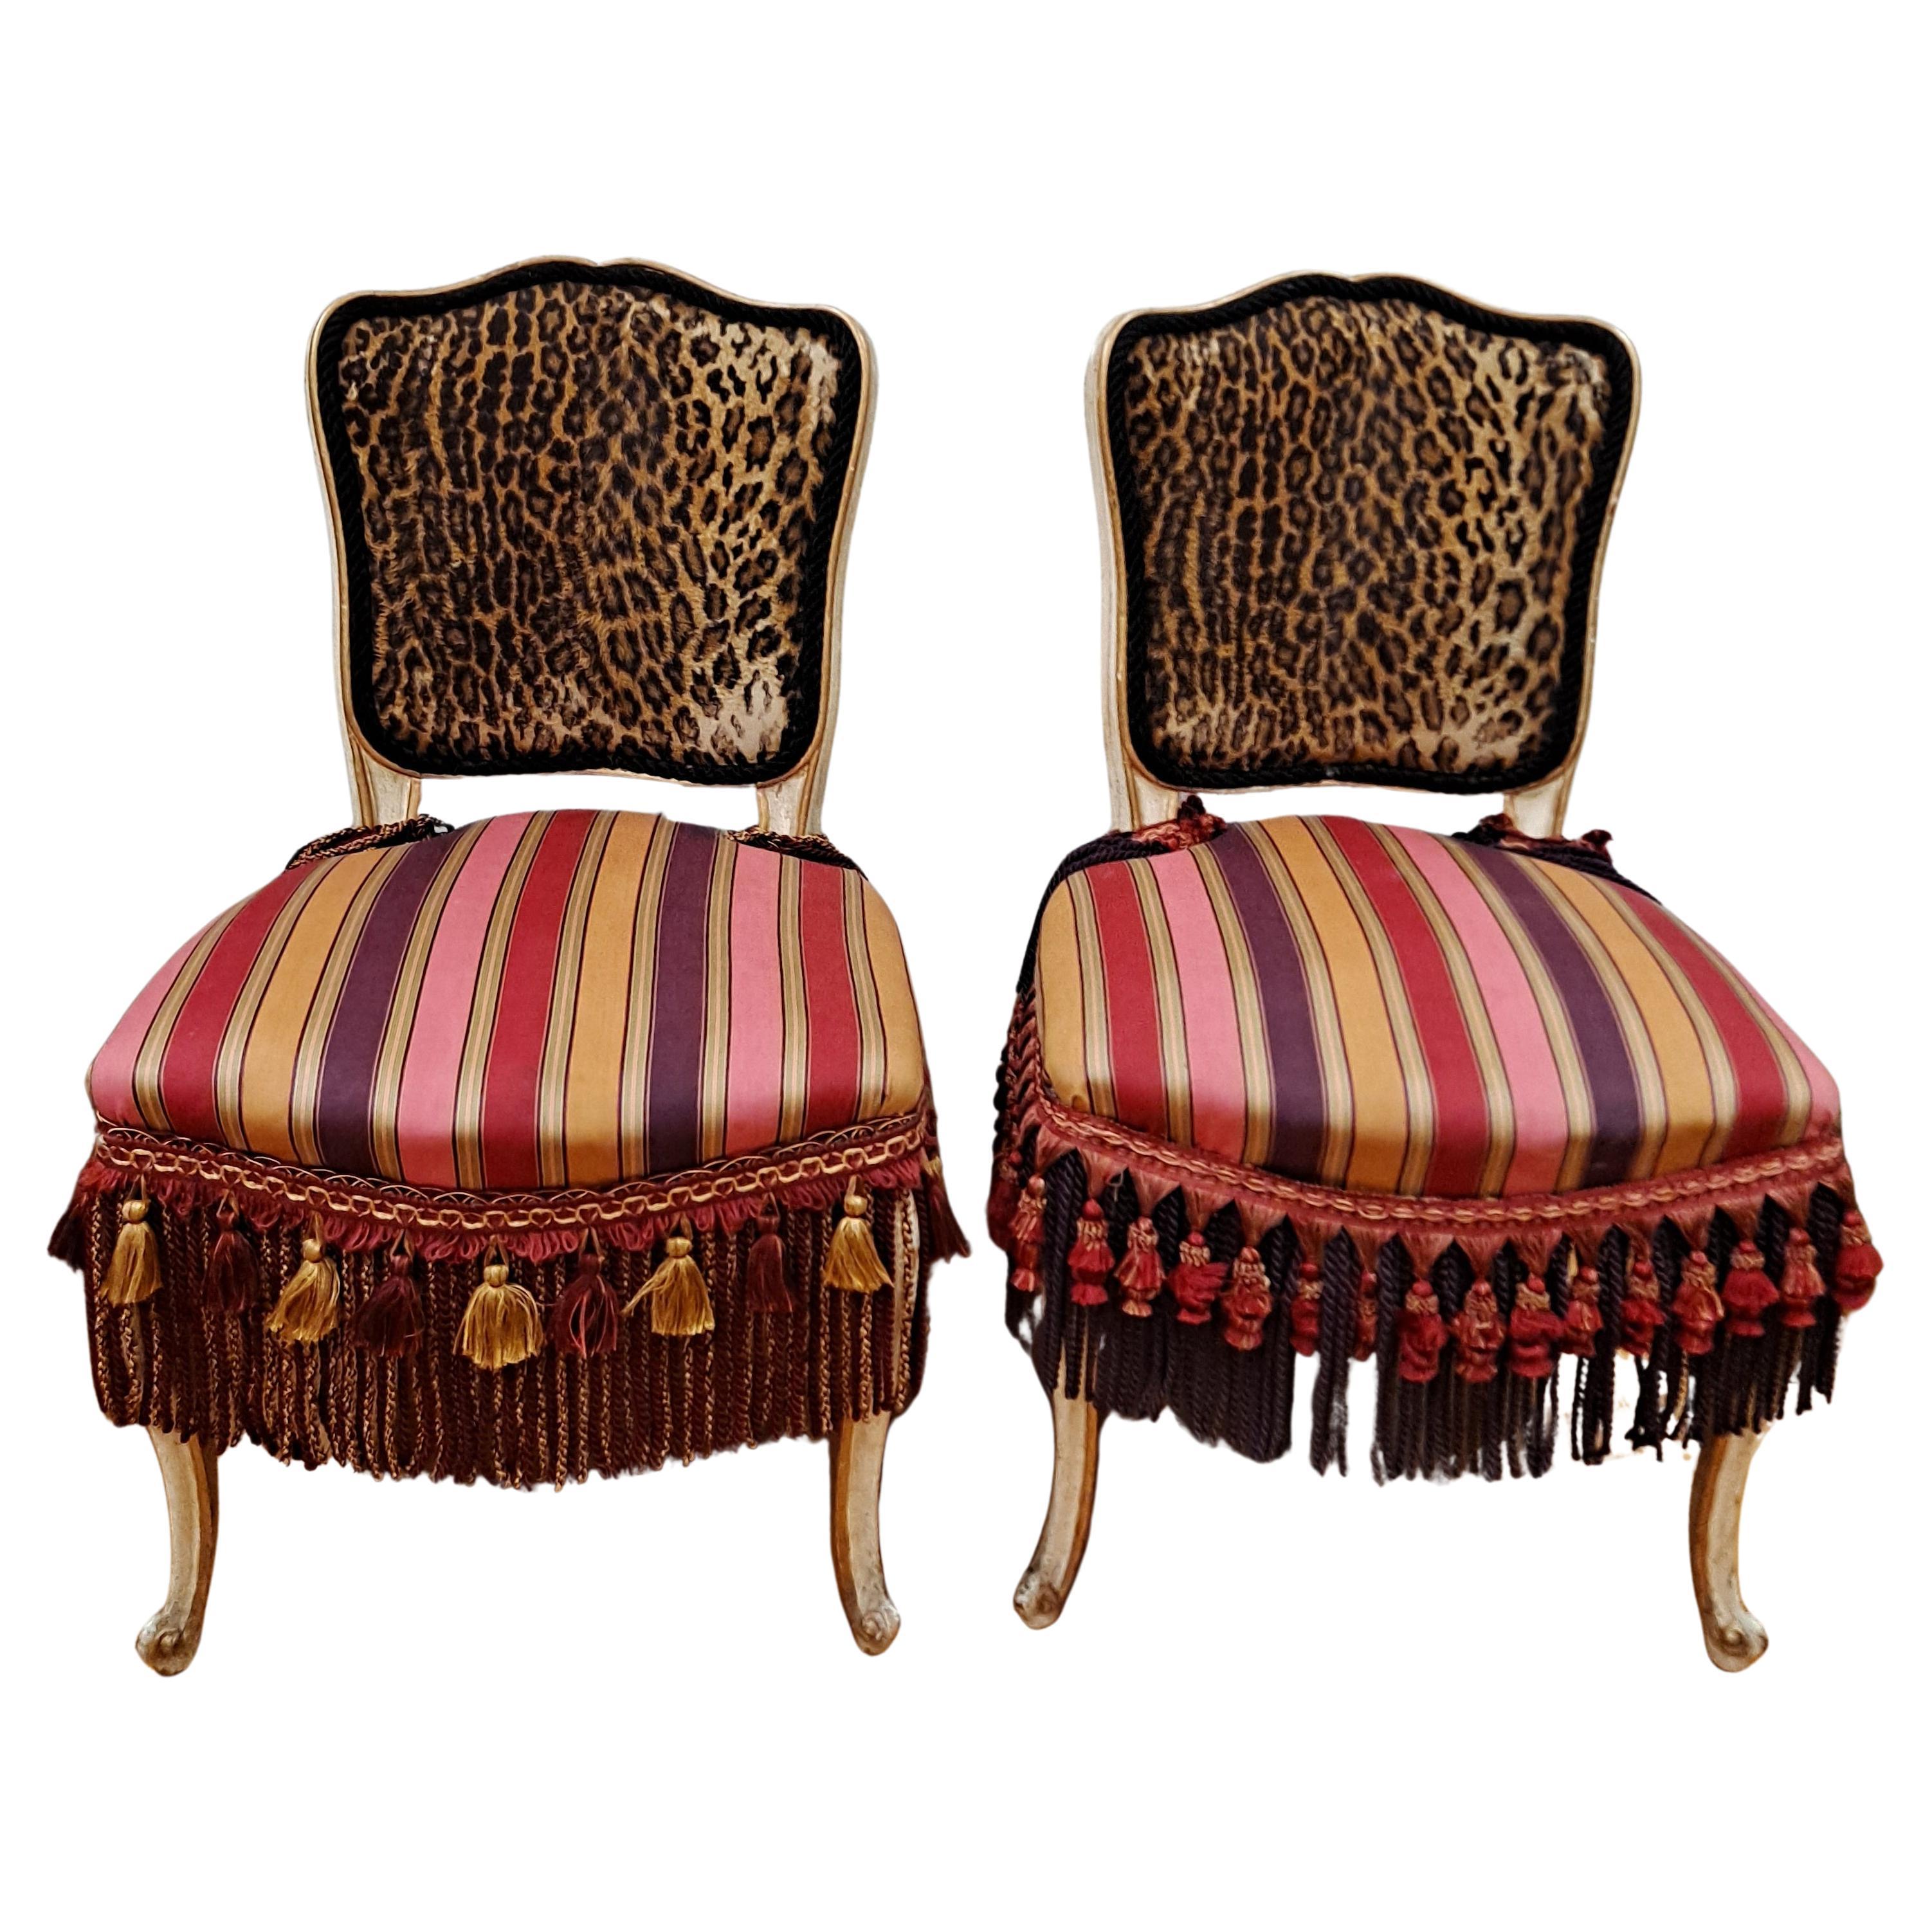 Pair of French style side chairs